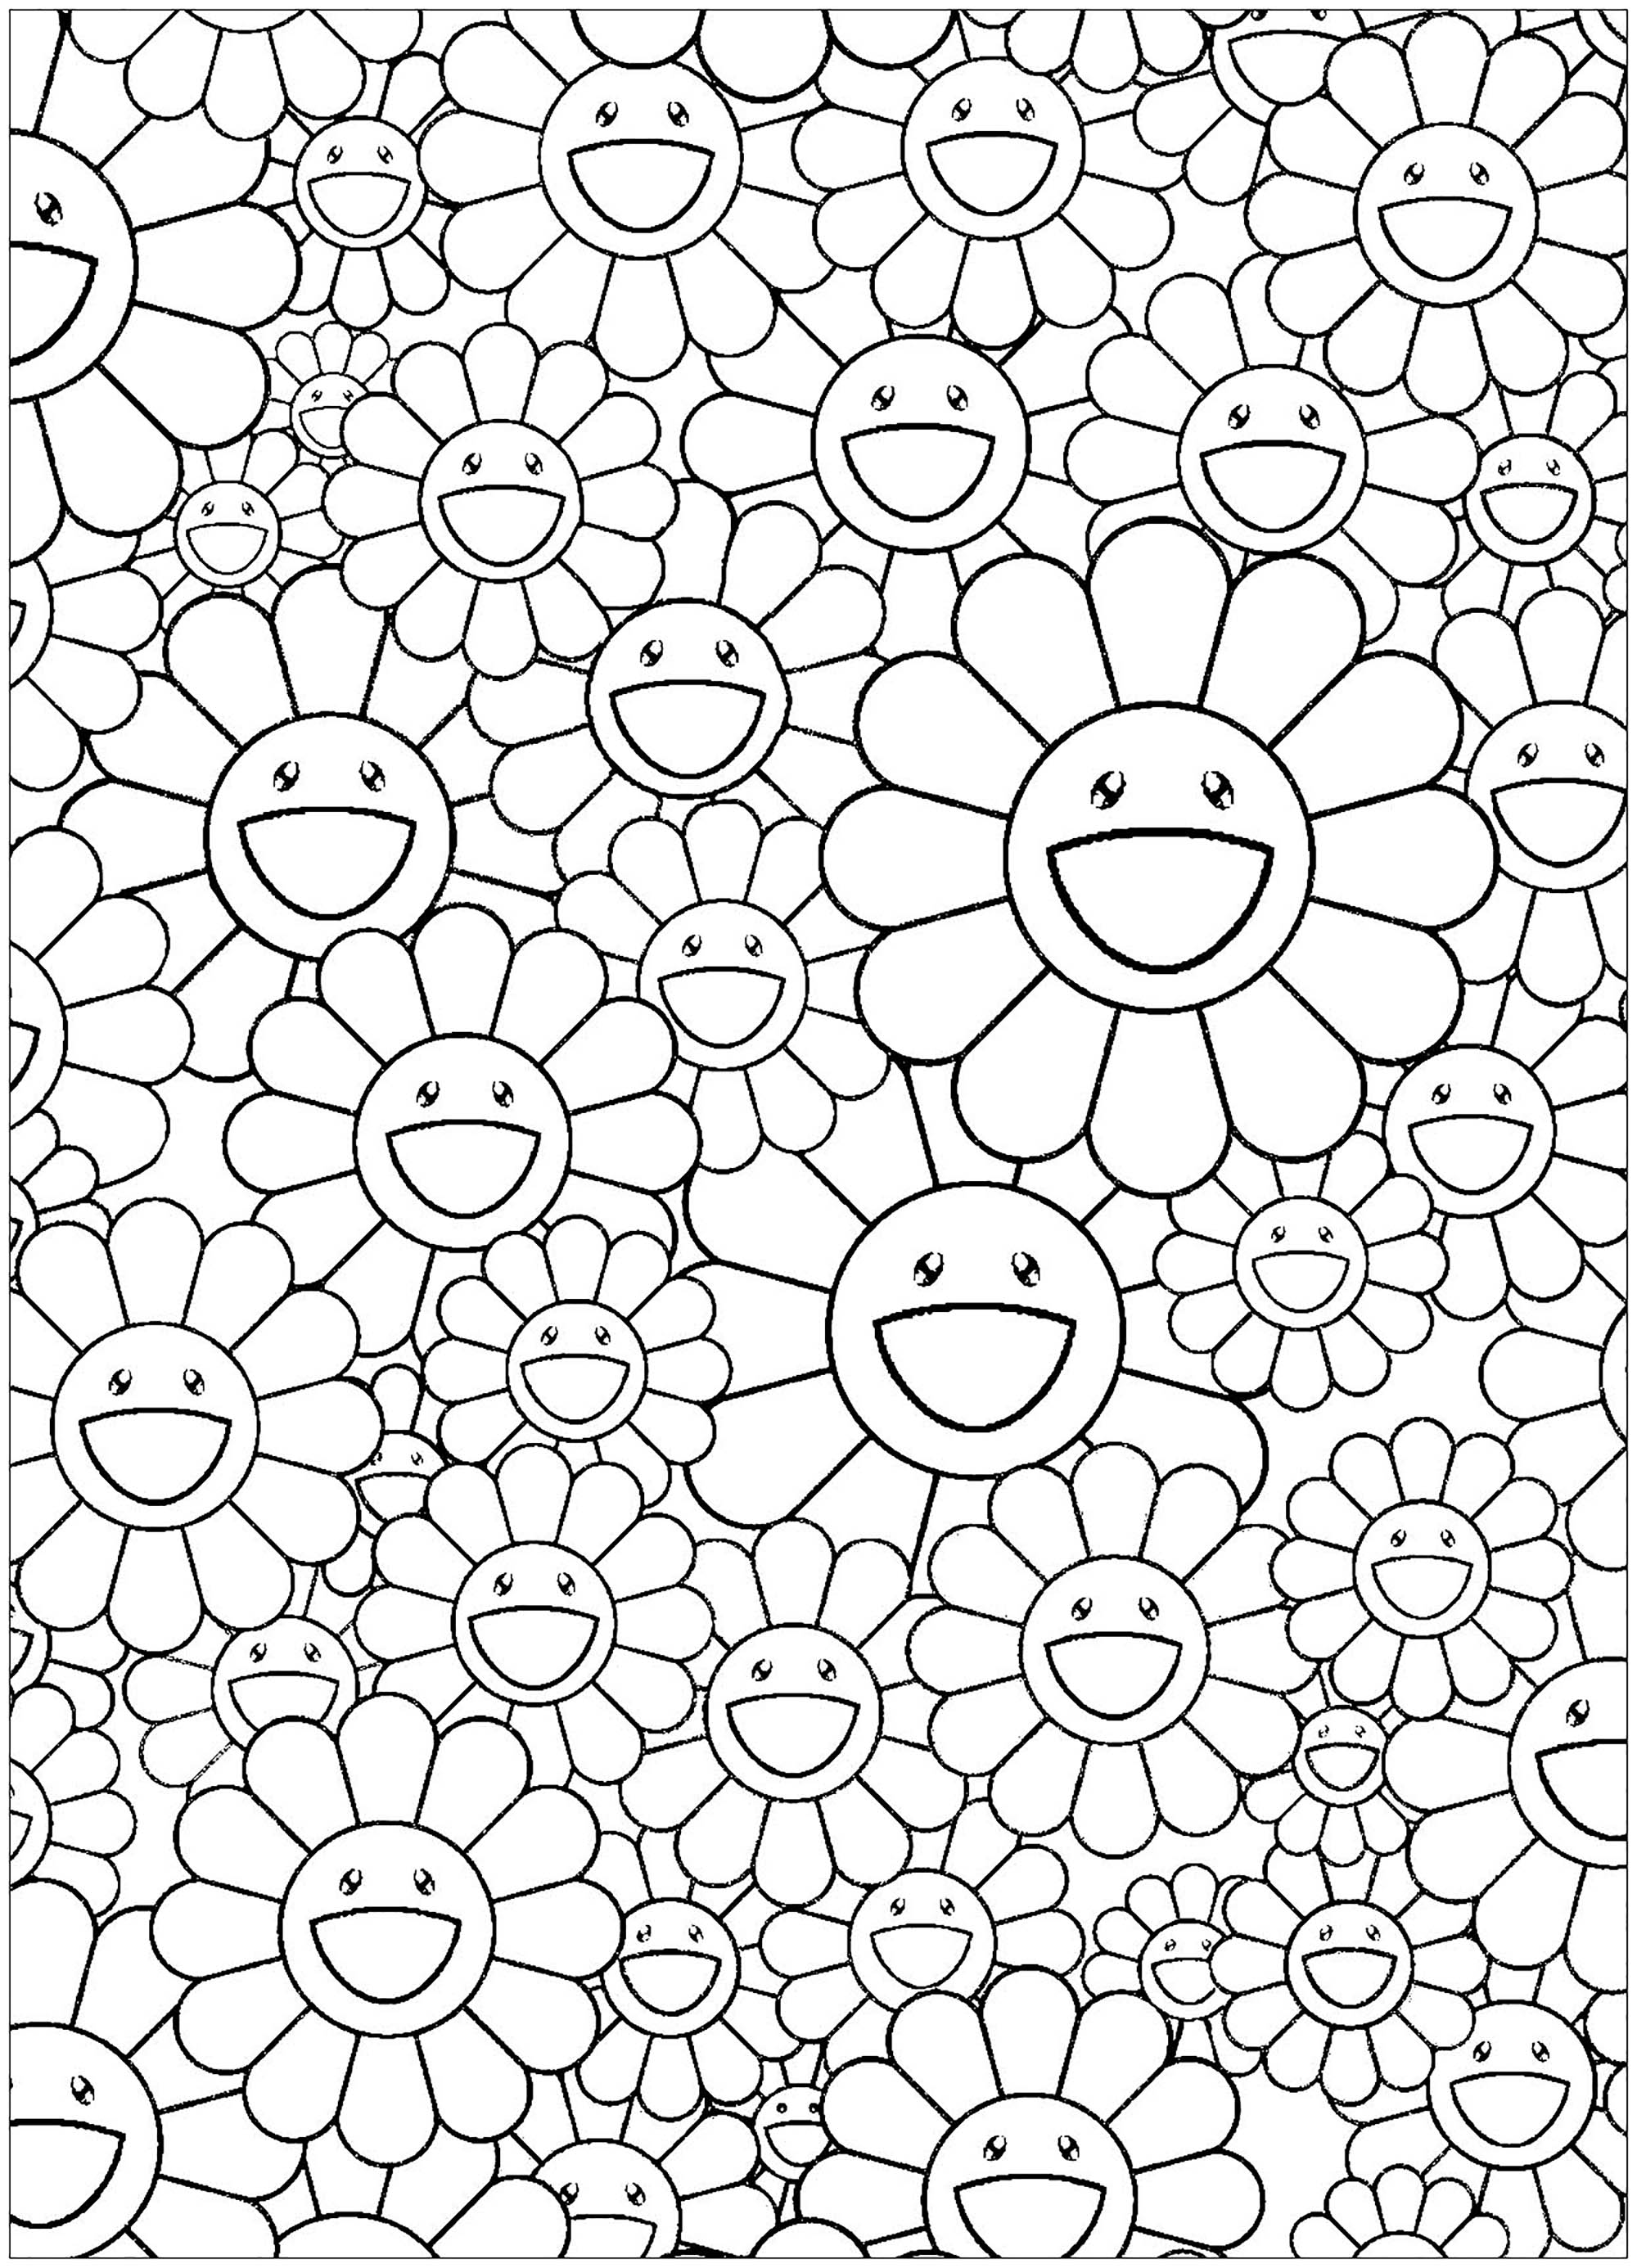 Coloring page inspired by a work by Japanese artist Takashi Murakami (style : Superflat) - simple version. Happy flowers !